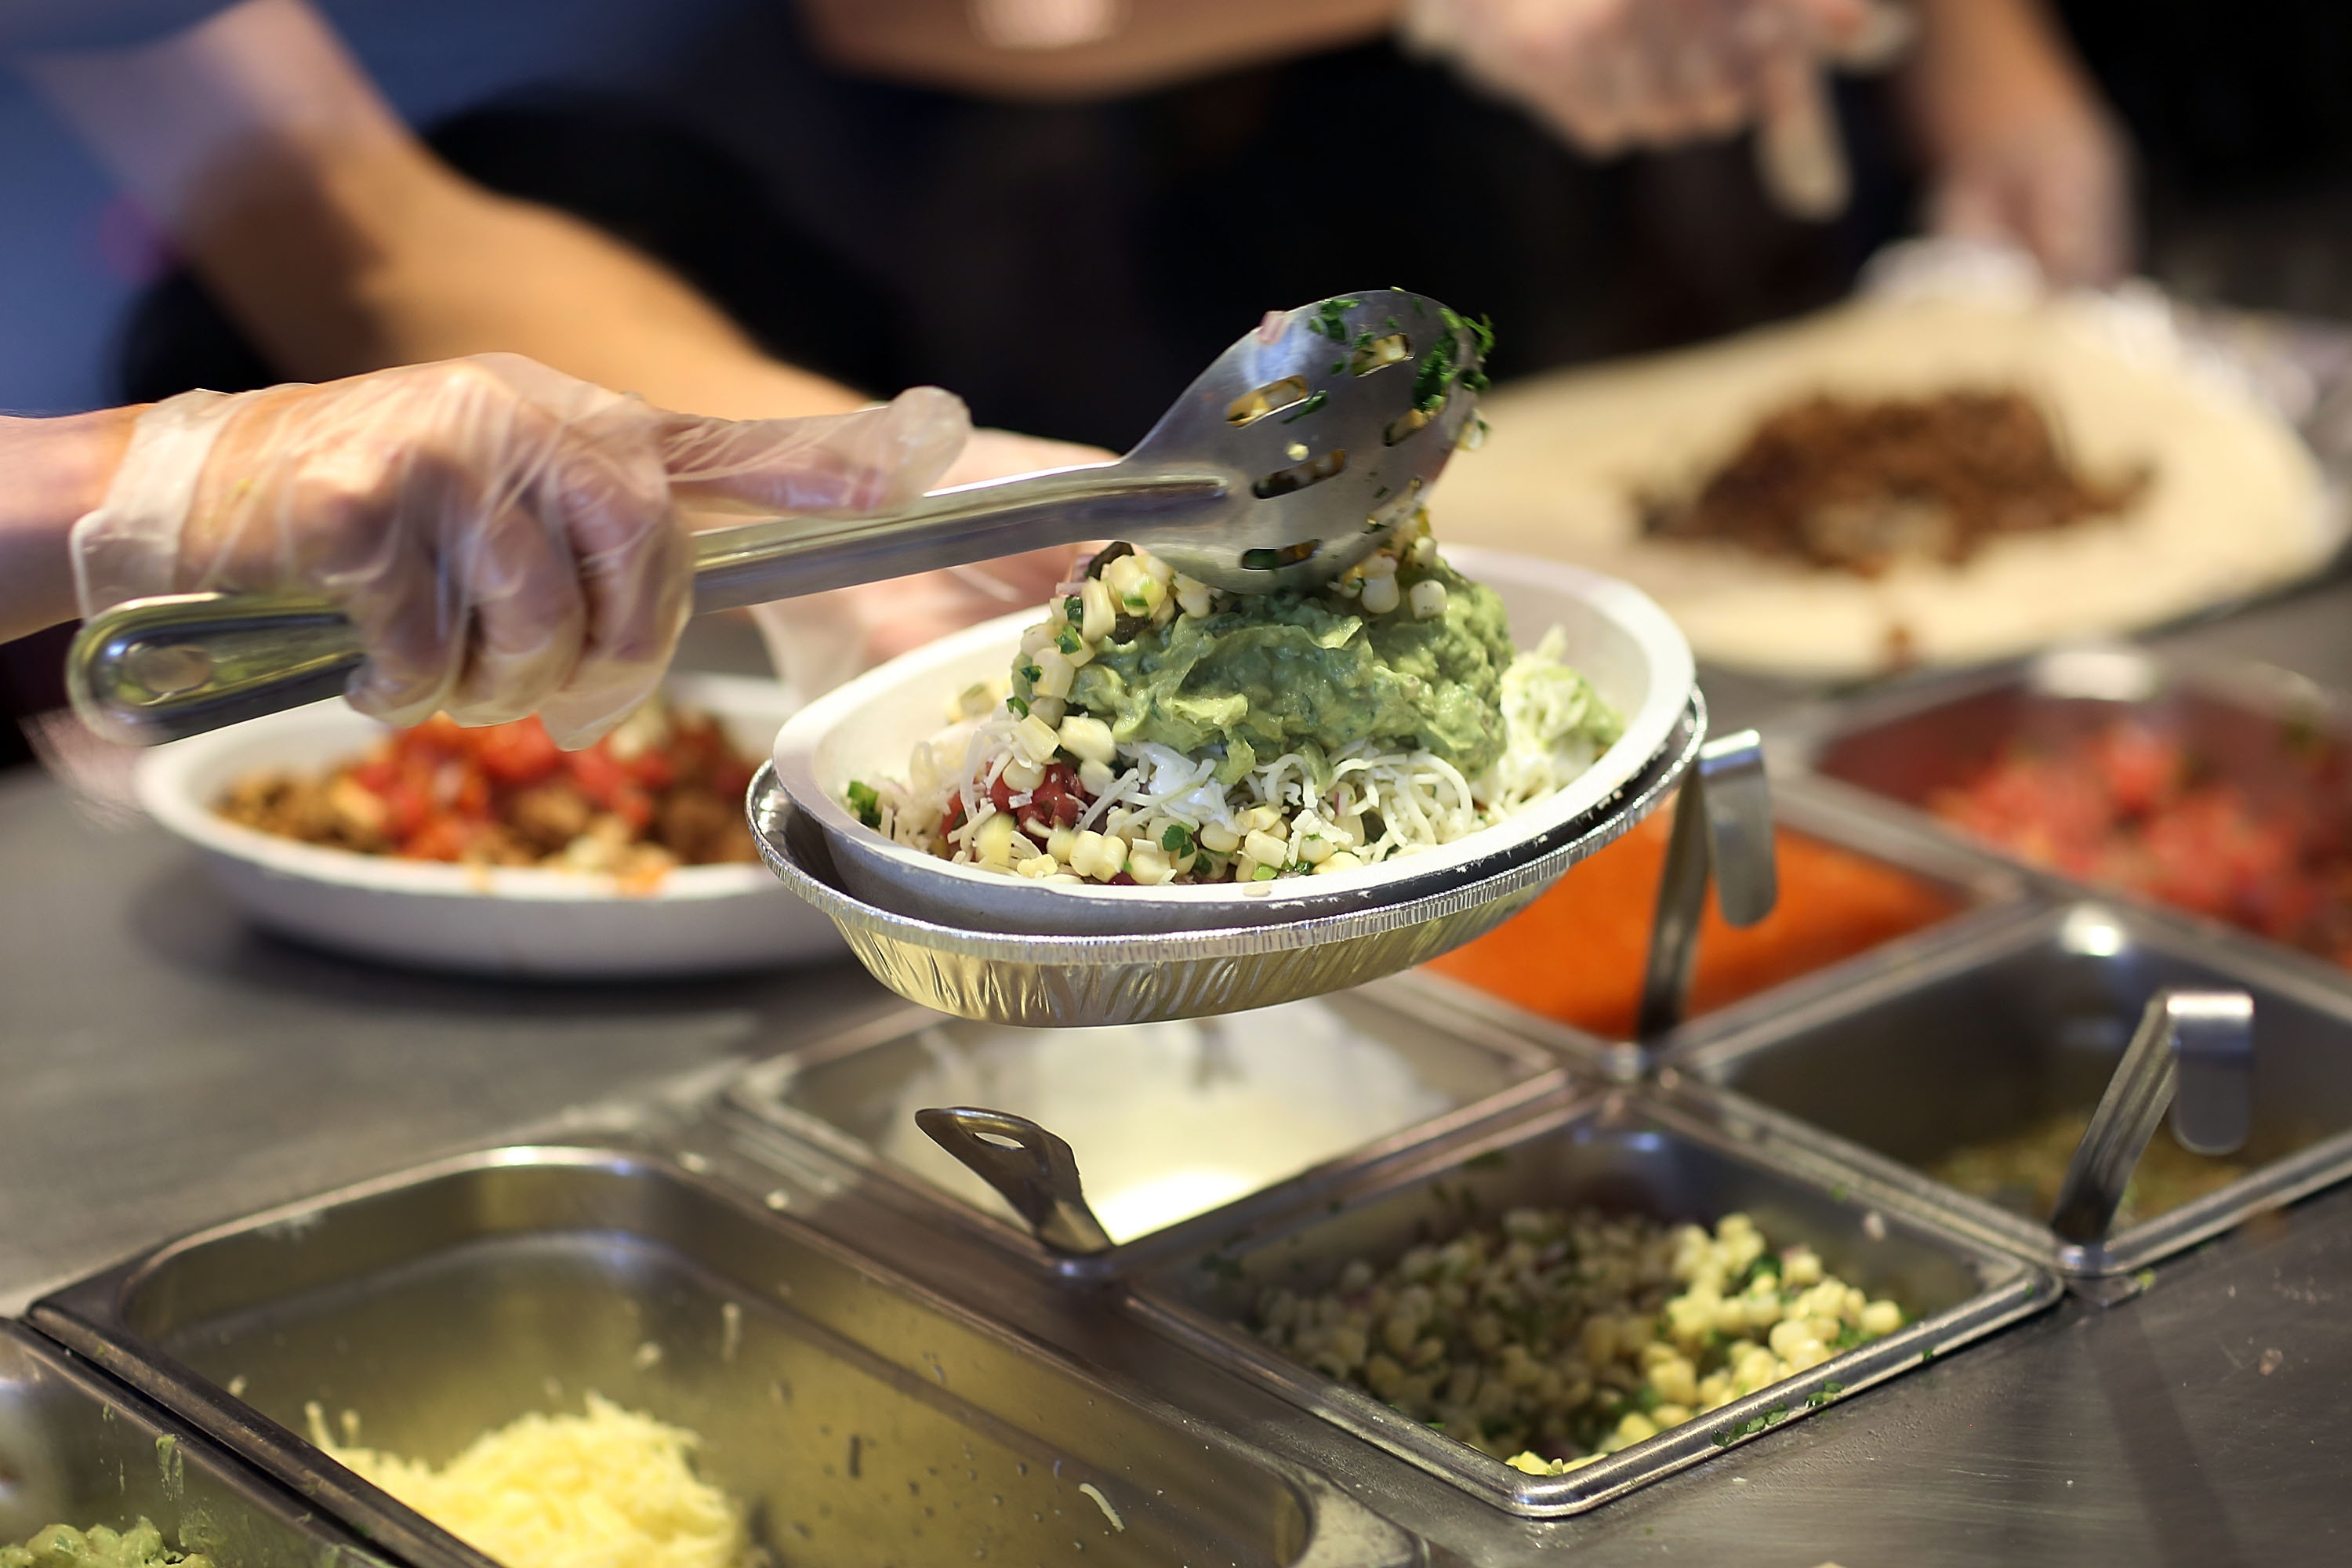 Chipotle restaurant workers fill orders for customers on the day that the company announced it will only use non-GMO ingredients in its food on April 27, 2015 in Miami, Florida. The company announced, that the Denver-based chain would not use the GMO's, which is an organism whose genome has been altered via genetic engineering in the food served at Chipotle Mexican Grills.